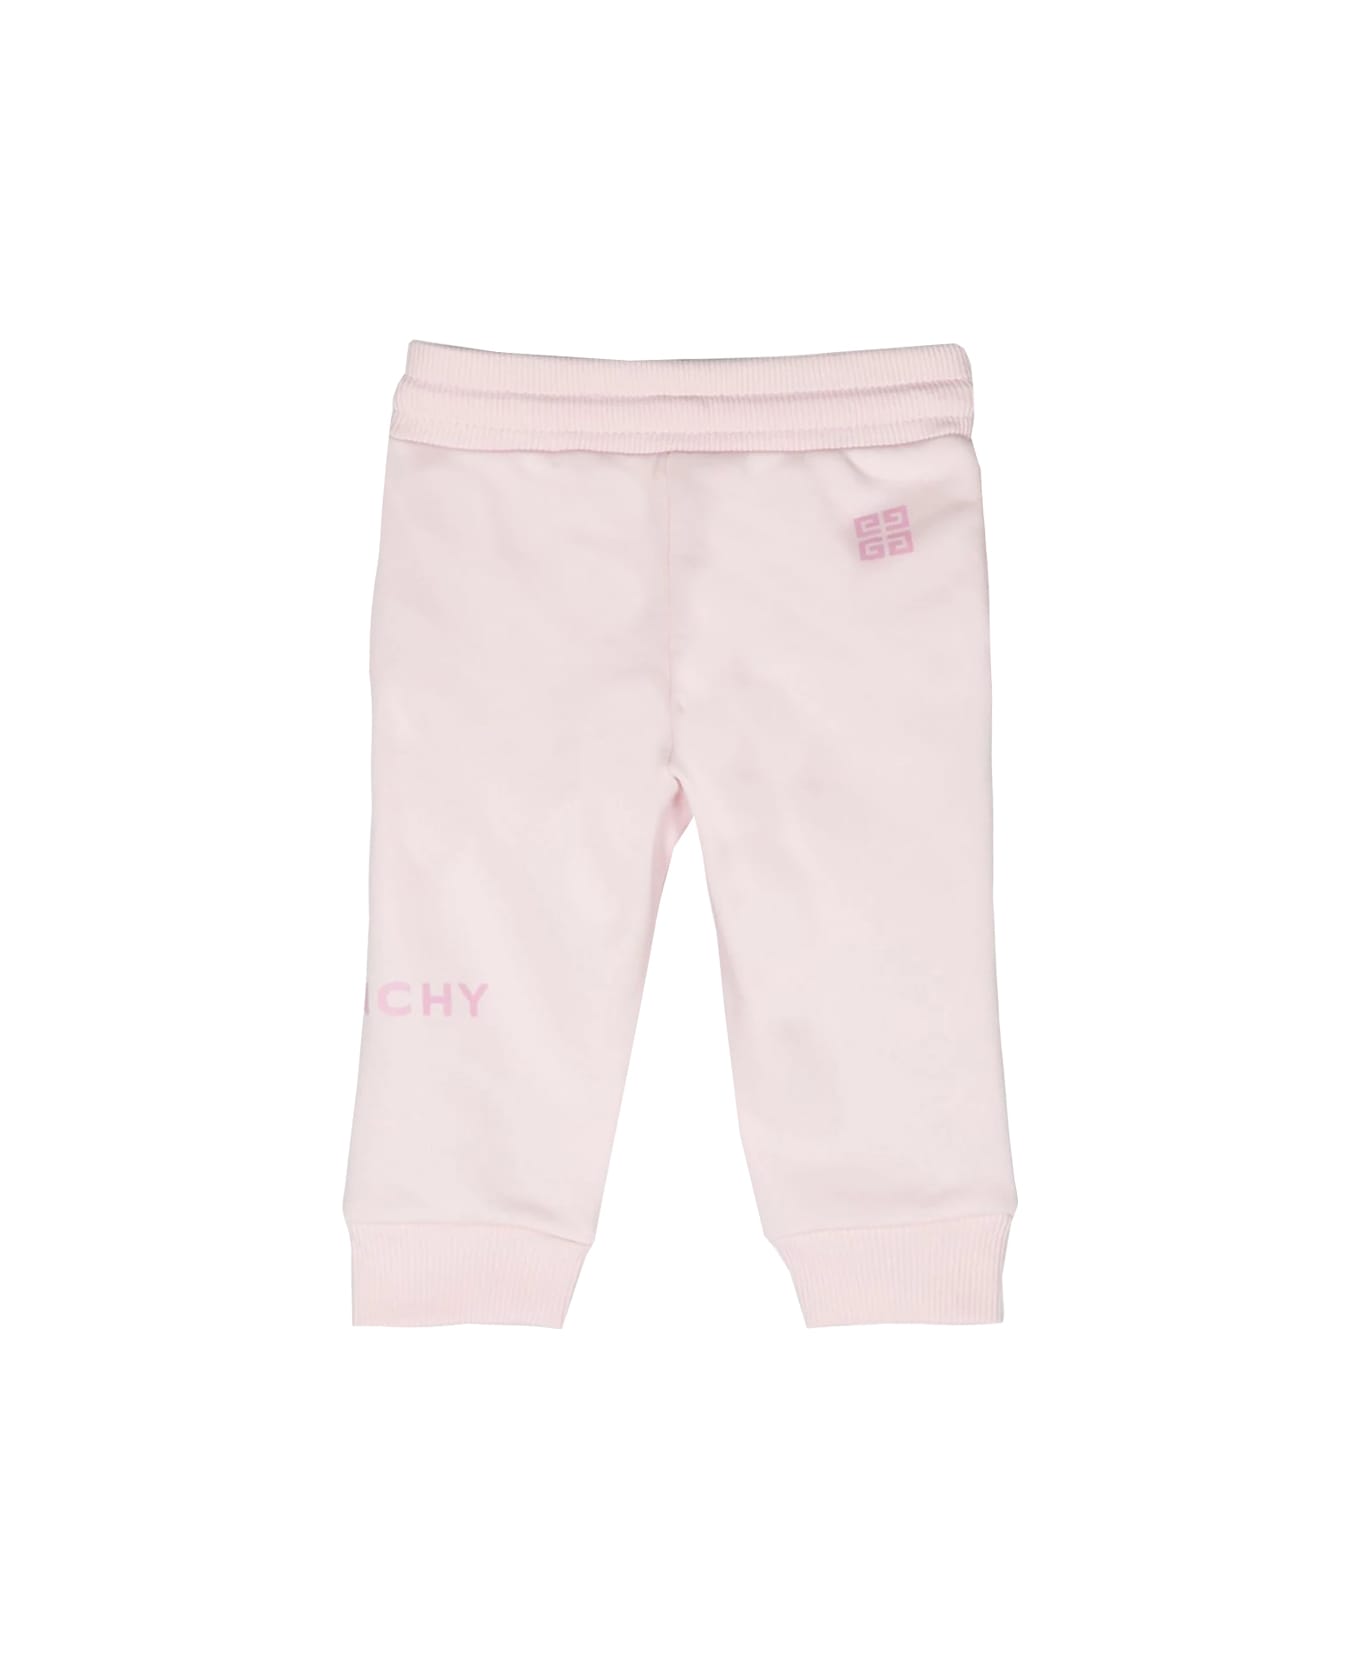 Givenchy Trousers - Rose